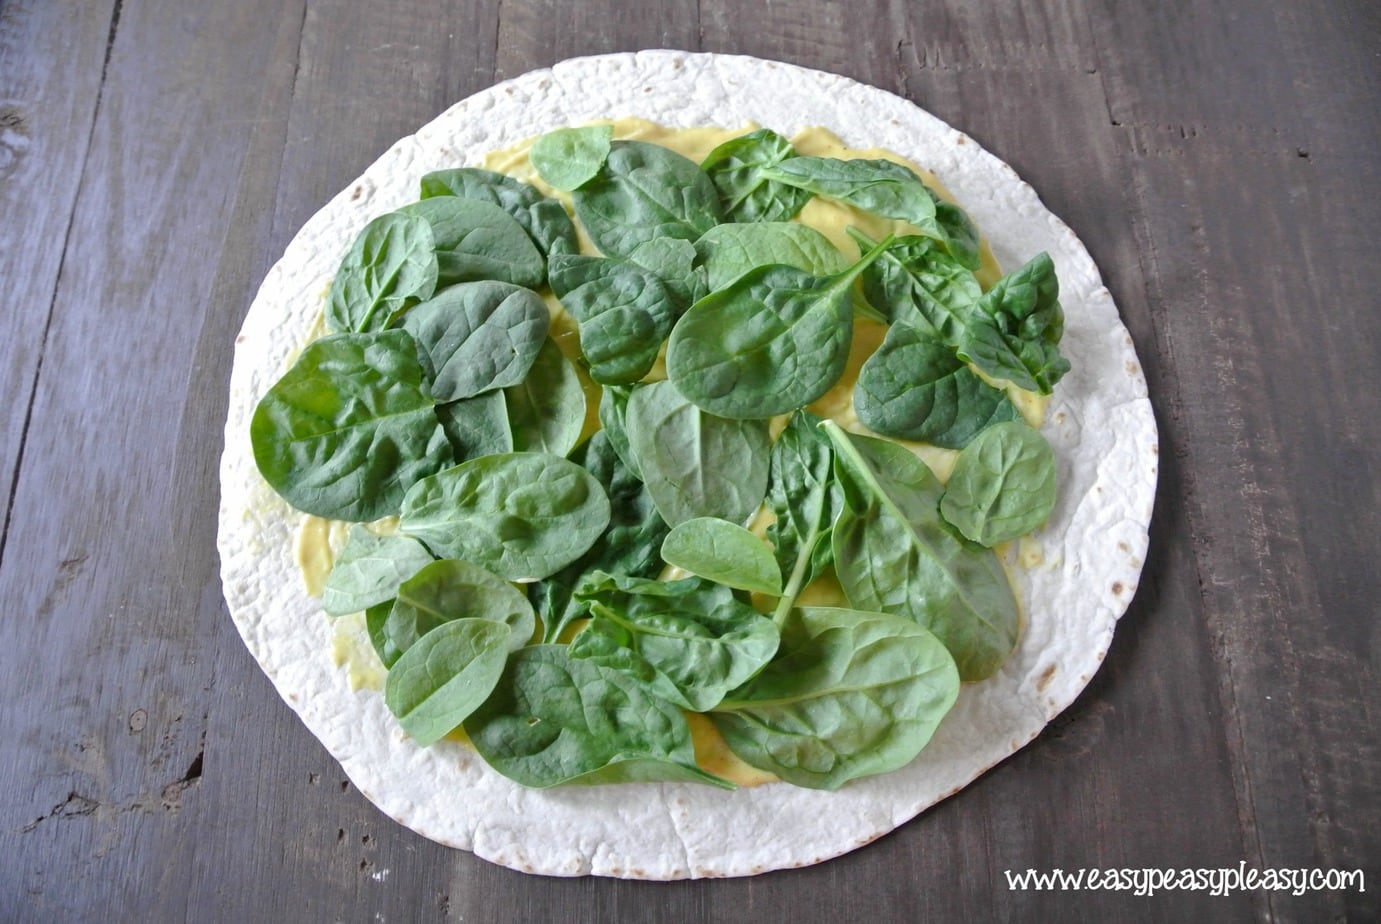 How to make a picture perfect wrap. You gotta have the greens!